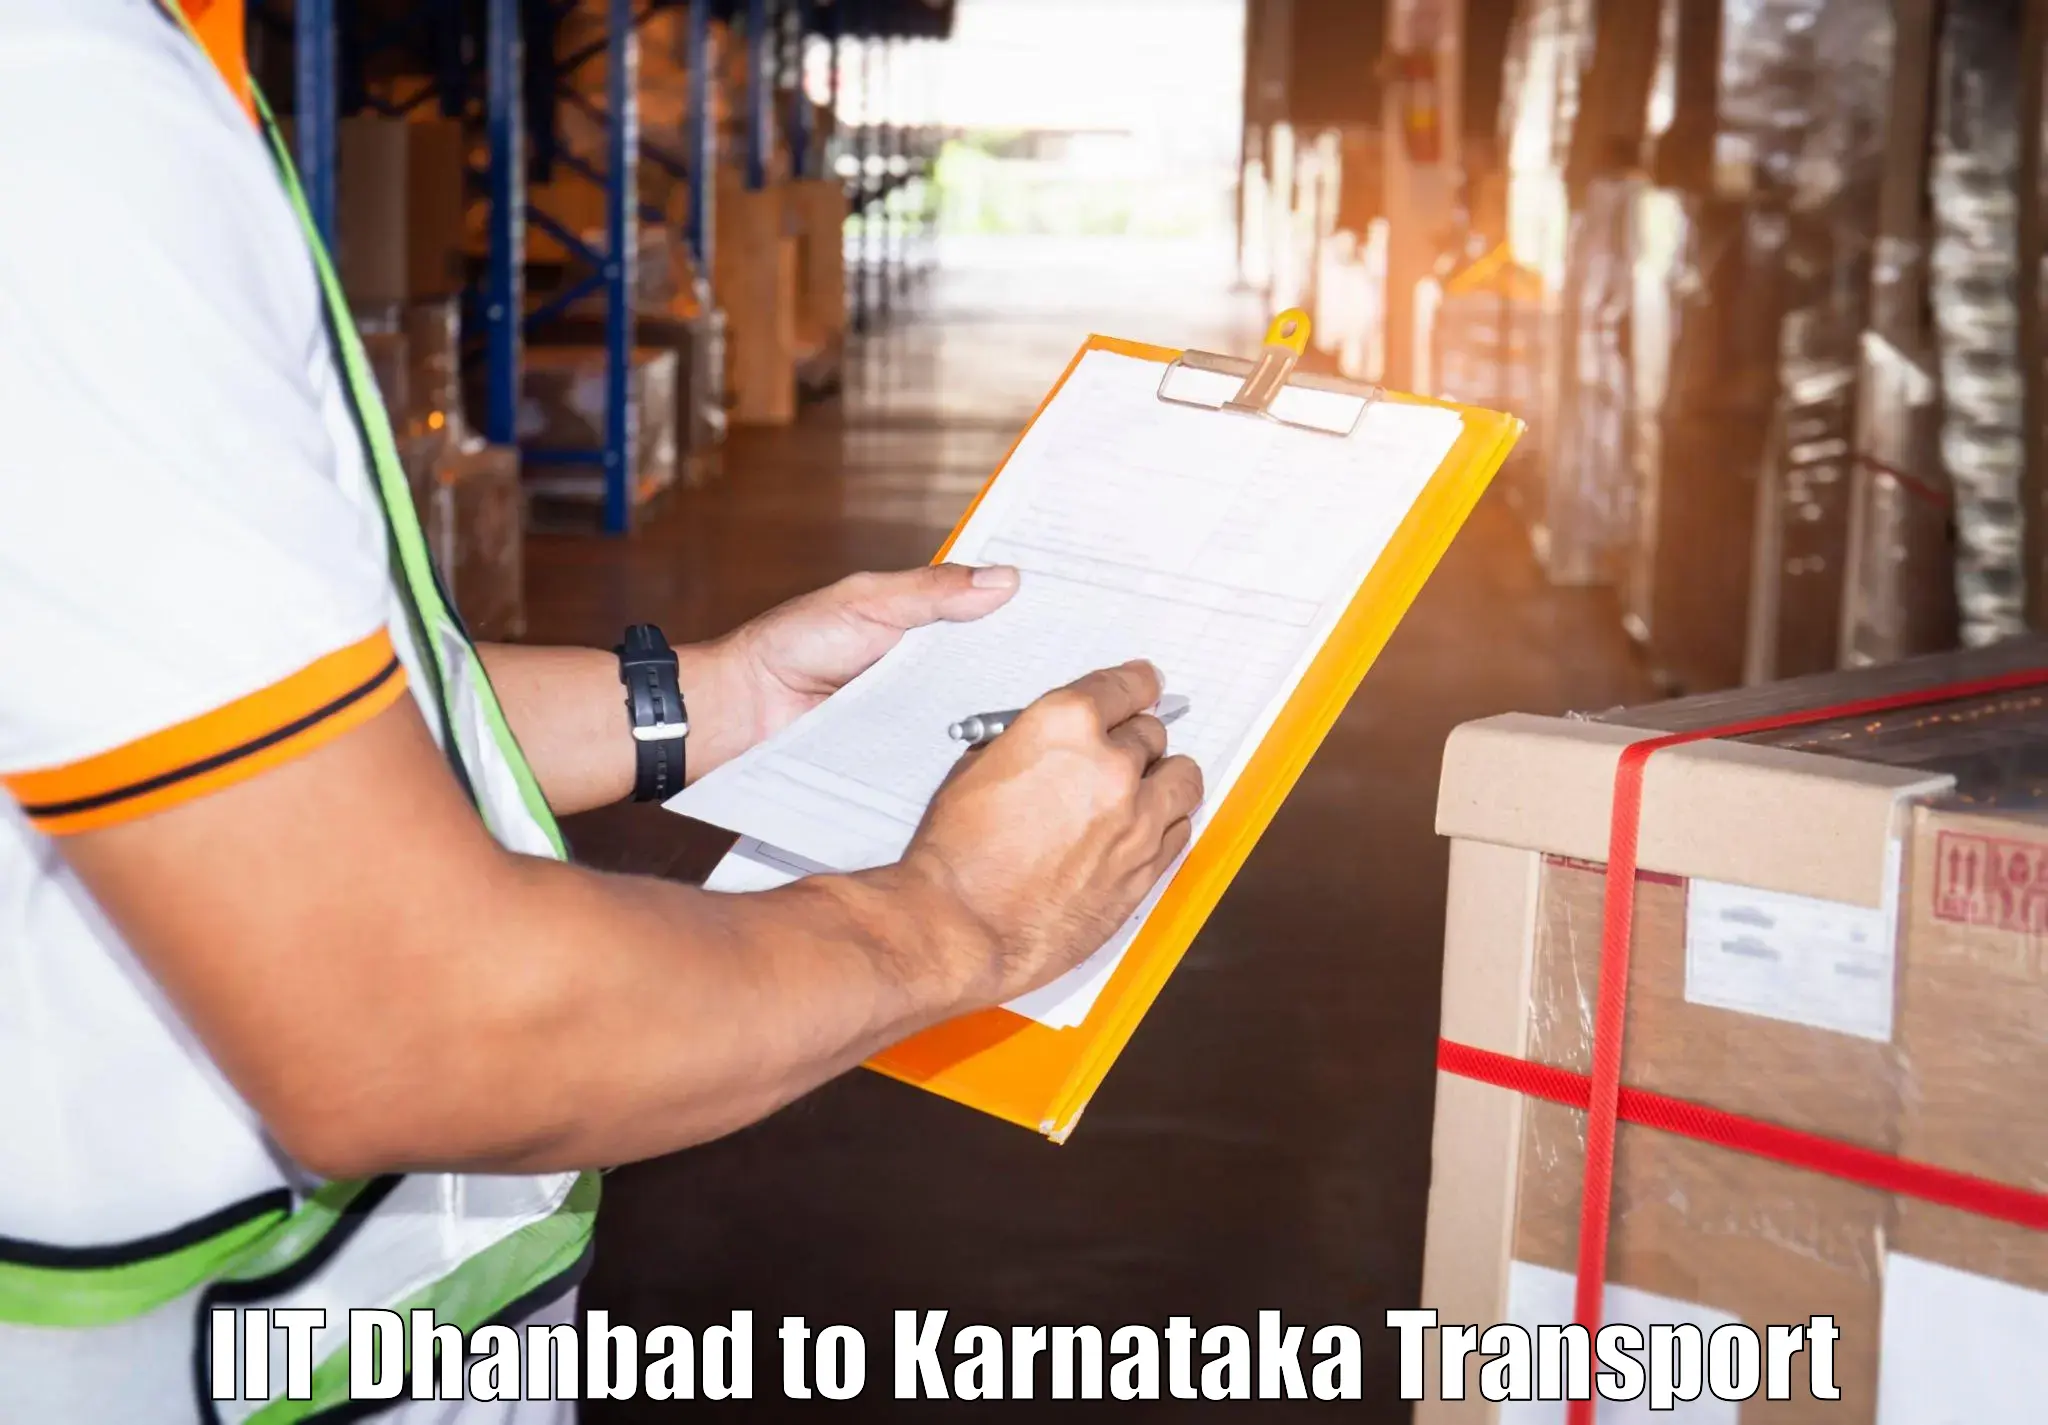 Air freight transport services in IIT Dhanbad to Karnataka